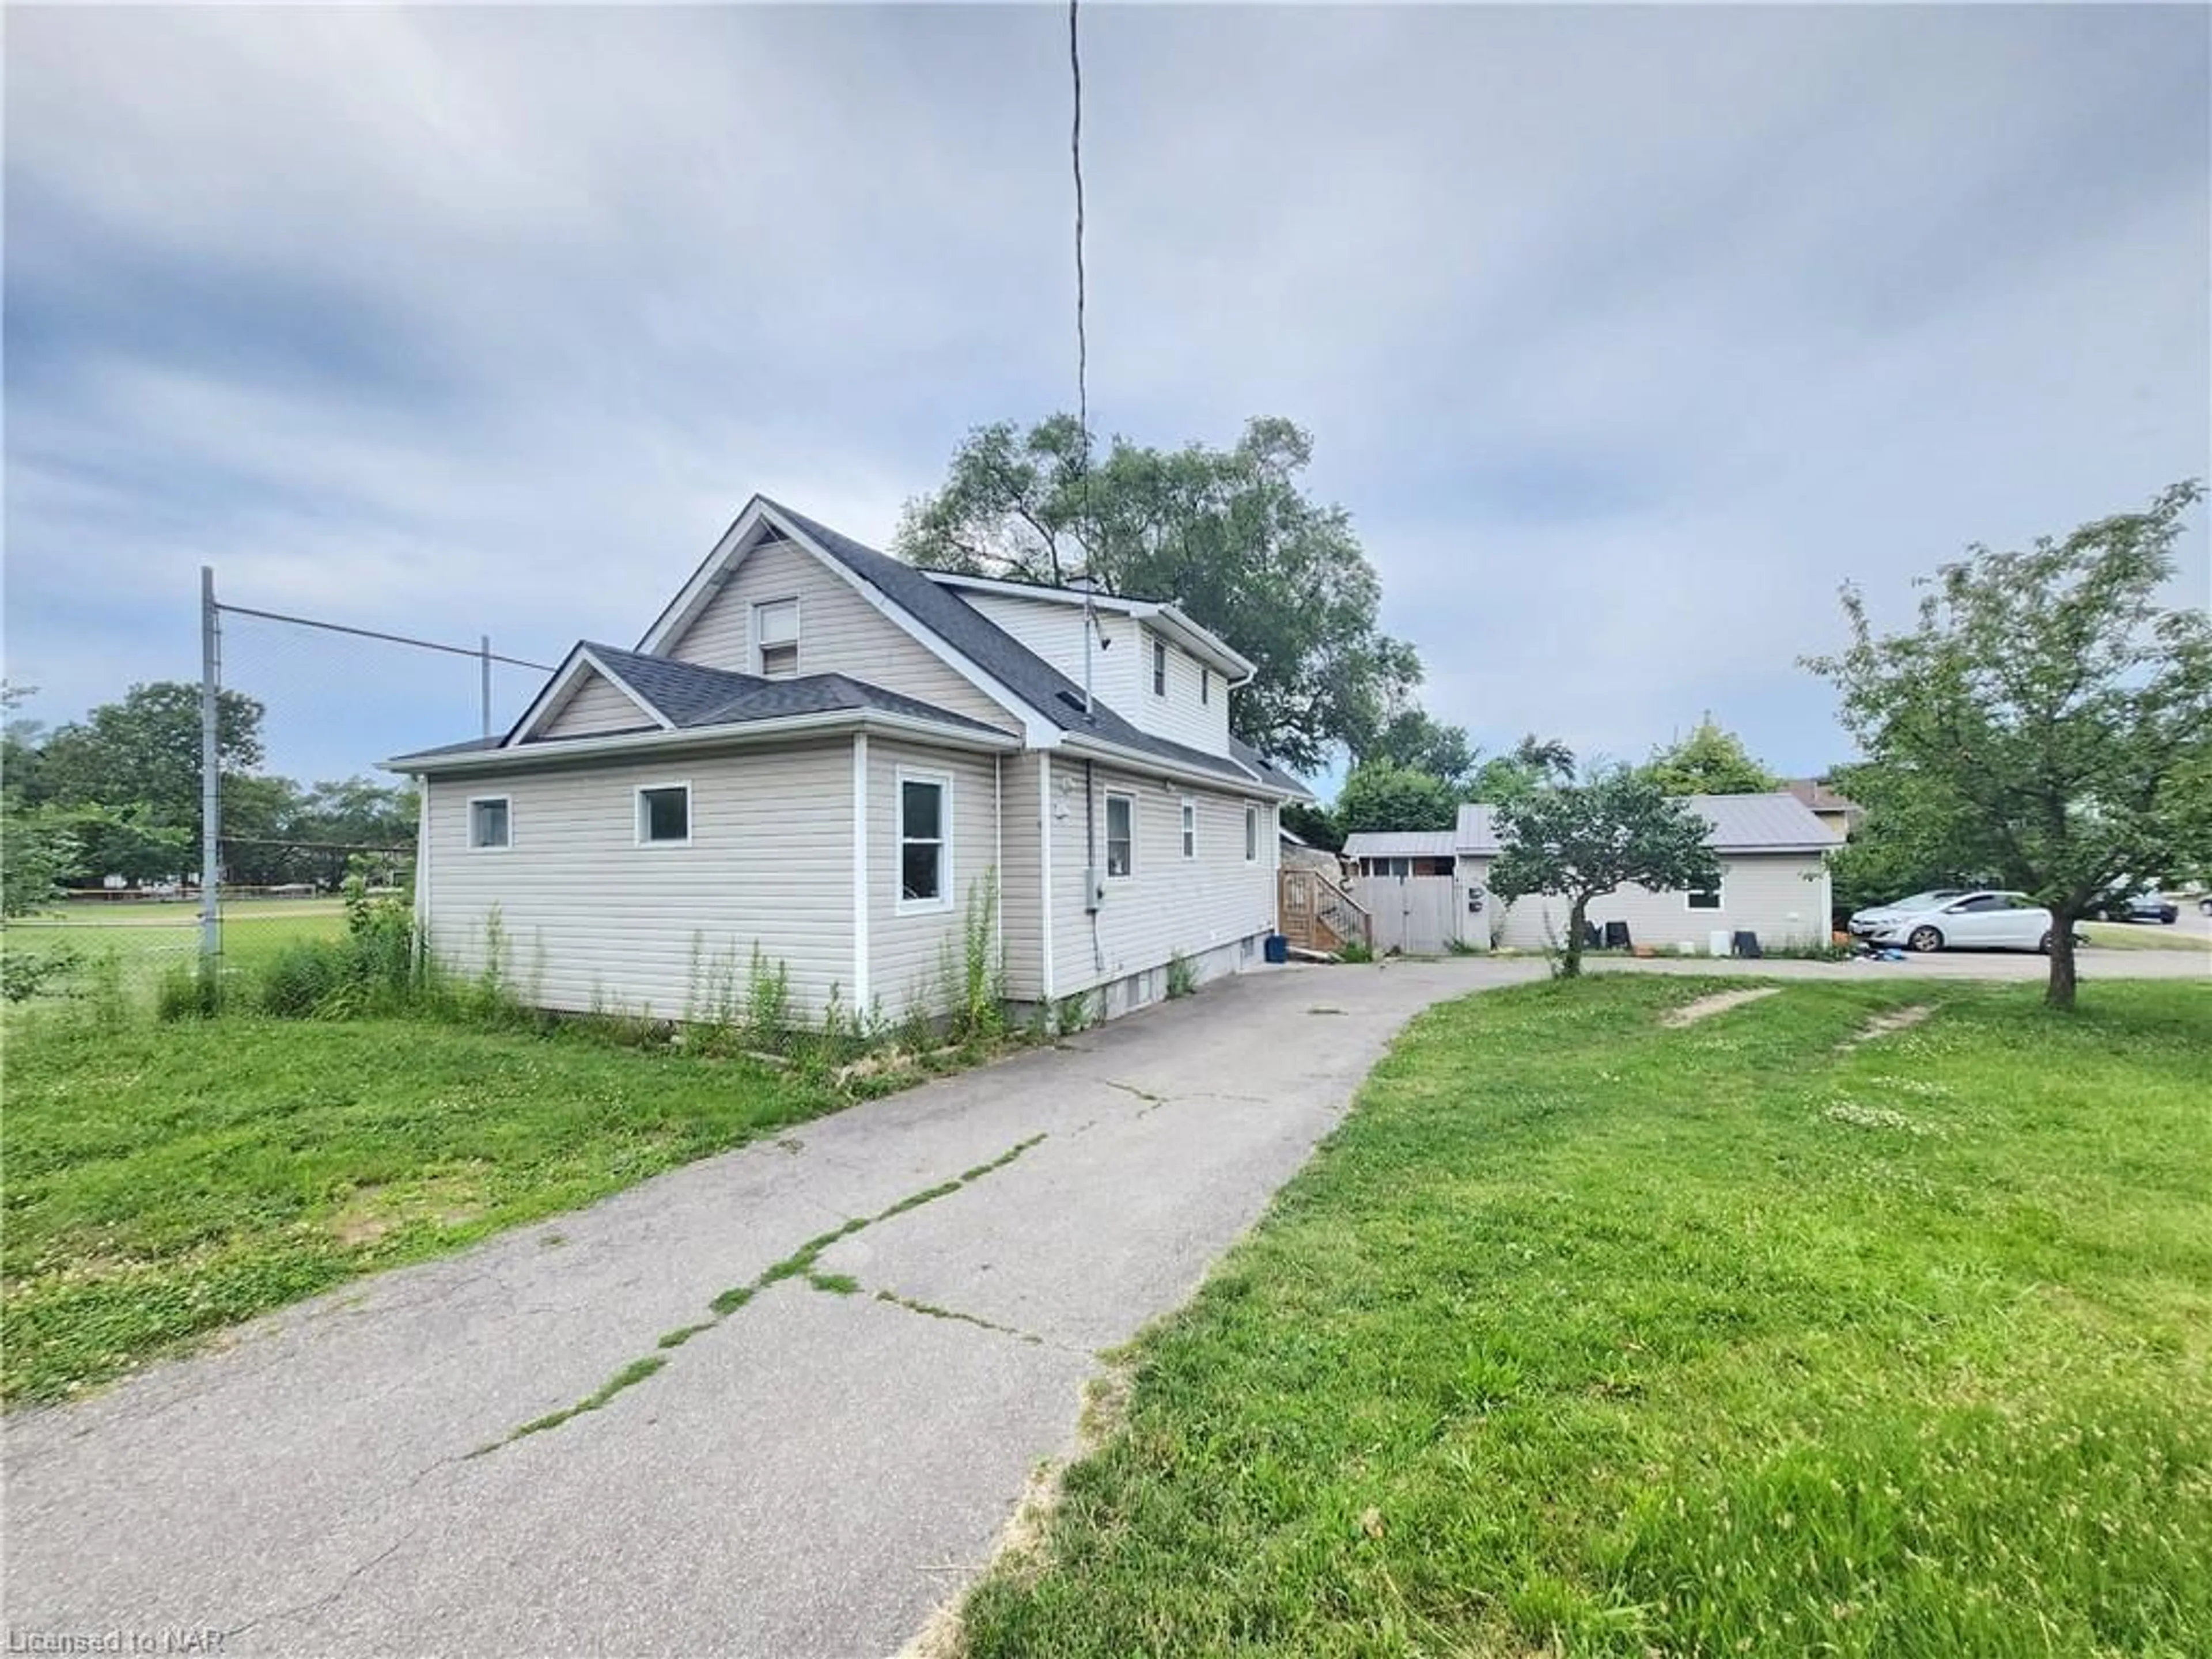 Frontside or backside of a home for 401 Queenston St, St. Catharines Ontario L2P 2Y1